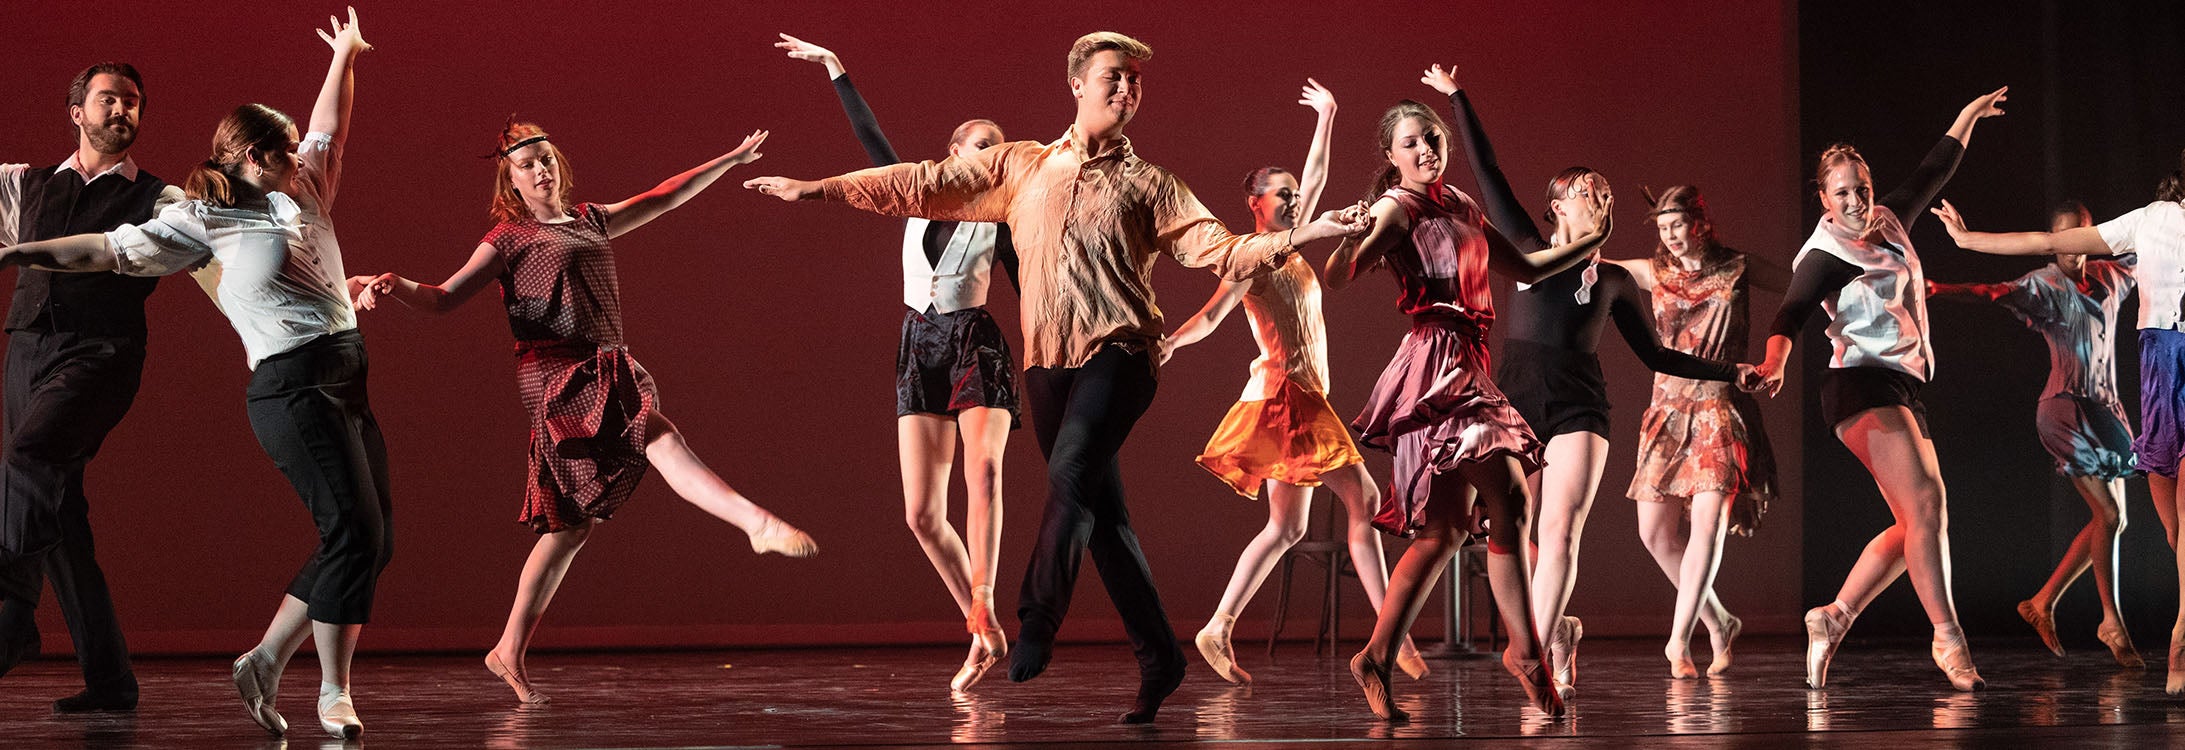 East Carolina University's Spring Dance Concert 2023 features a collaboration of many genres of dance including ballet, jazz, hip-hop, contemporary, ballroom and more.